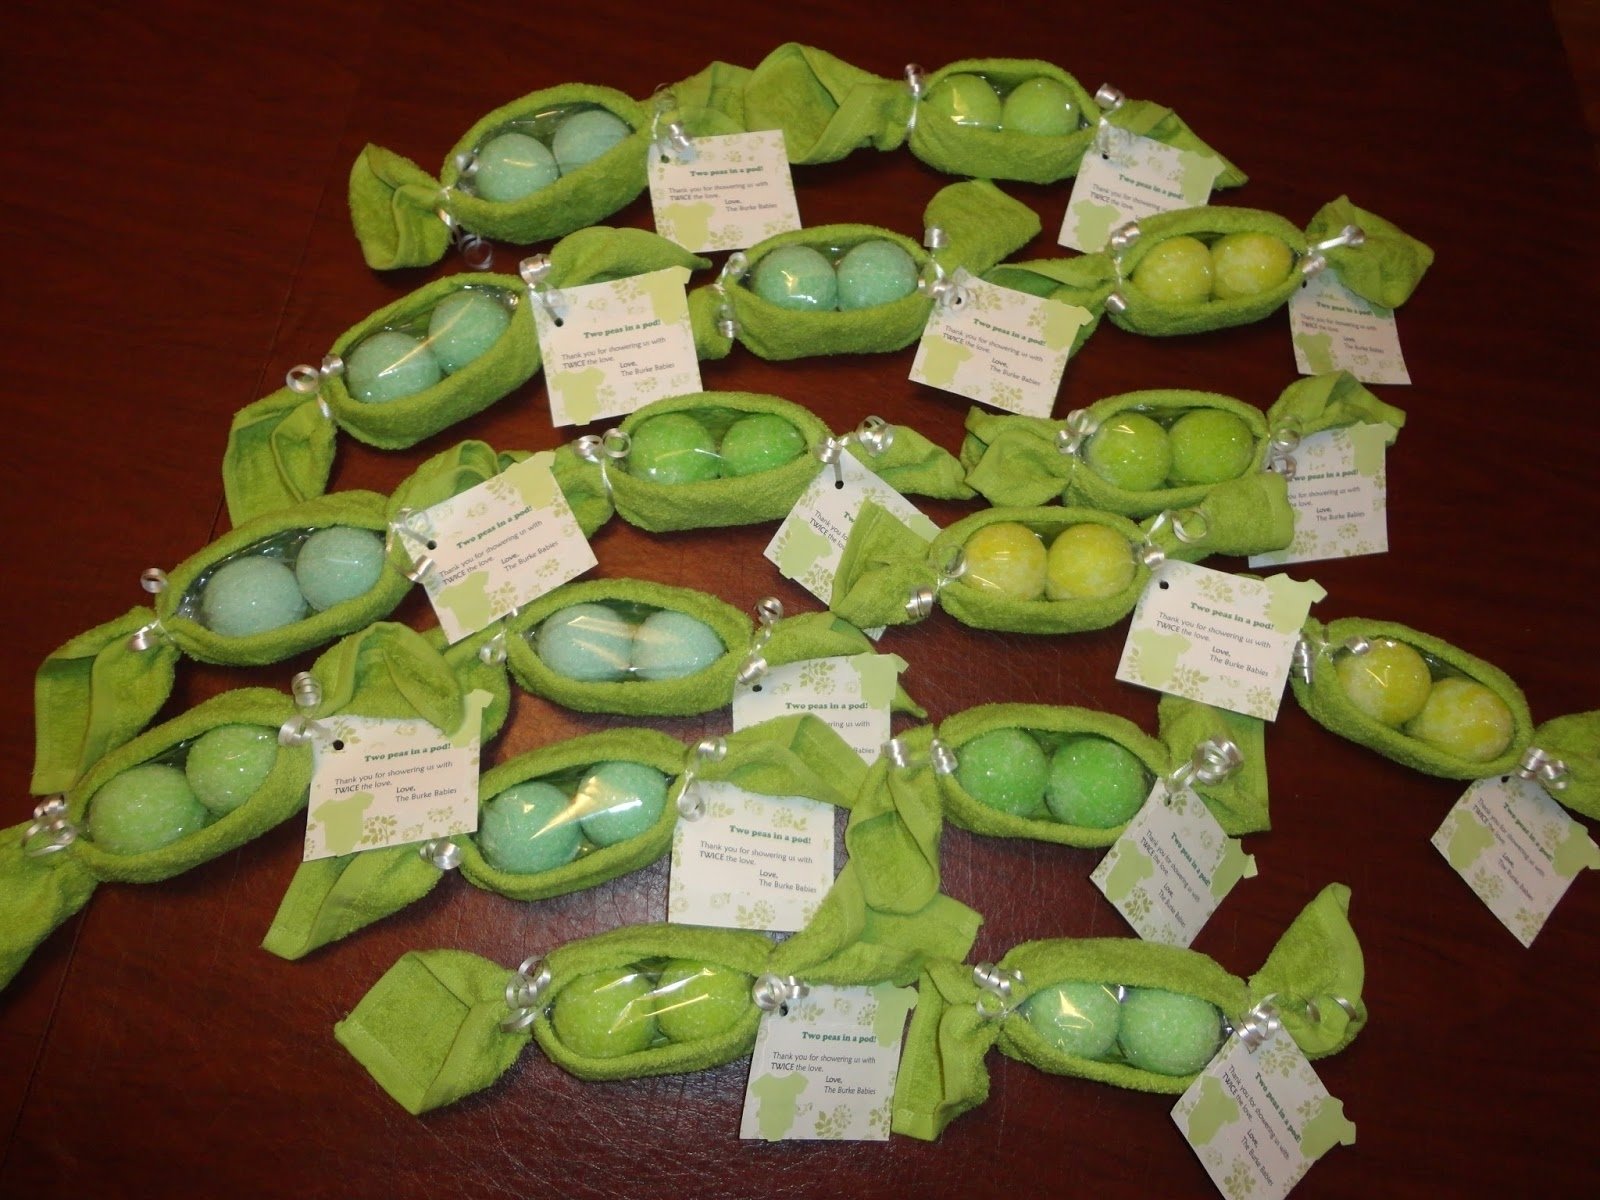 10 Most Recommended Two Peas In A Pod Baby Shower Ideas fresh 2 peas in a pod baby shower decorations decorating ideas 2018 2022